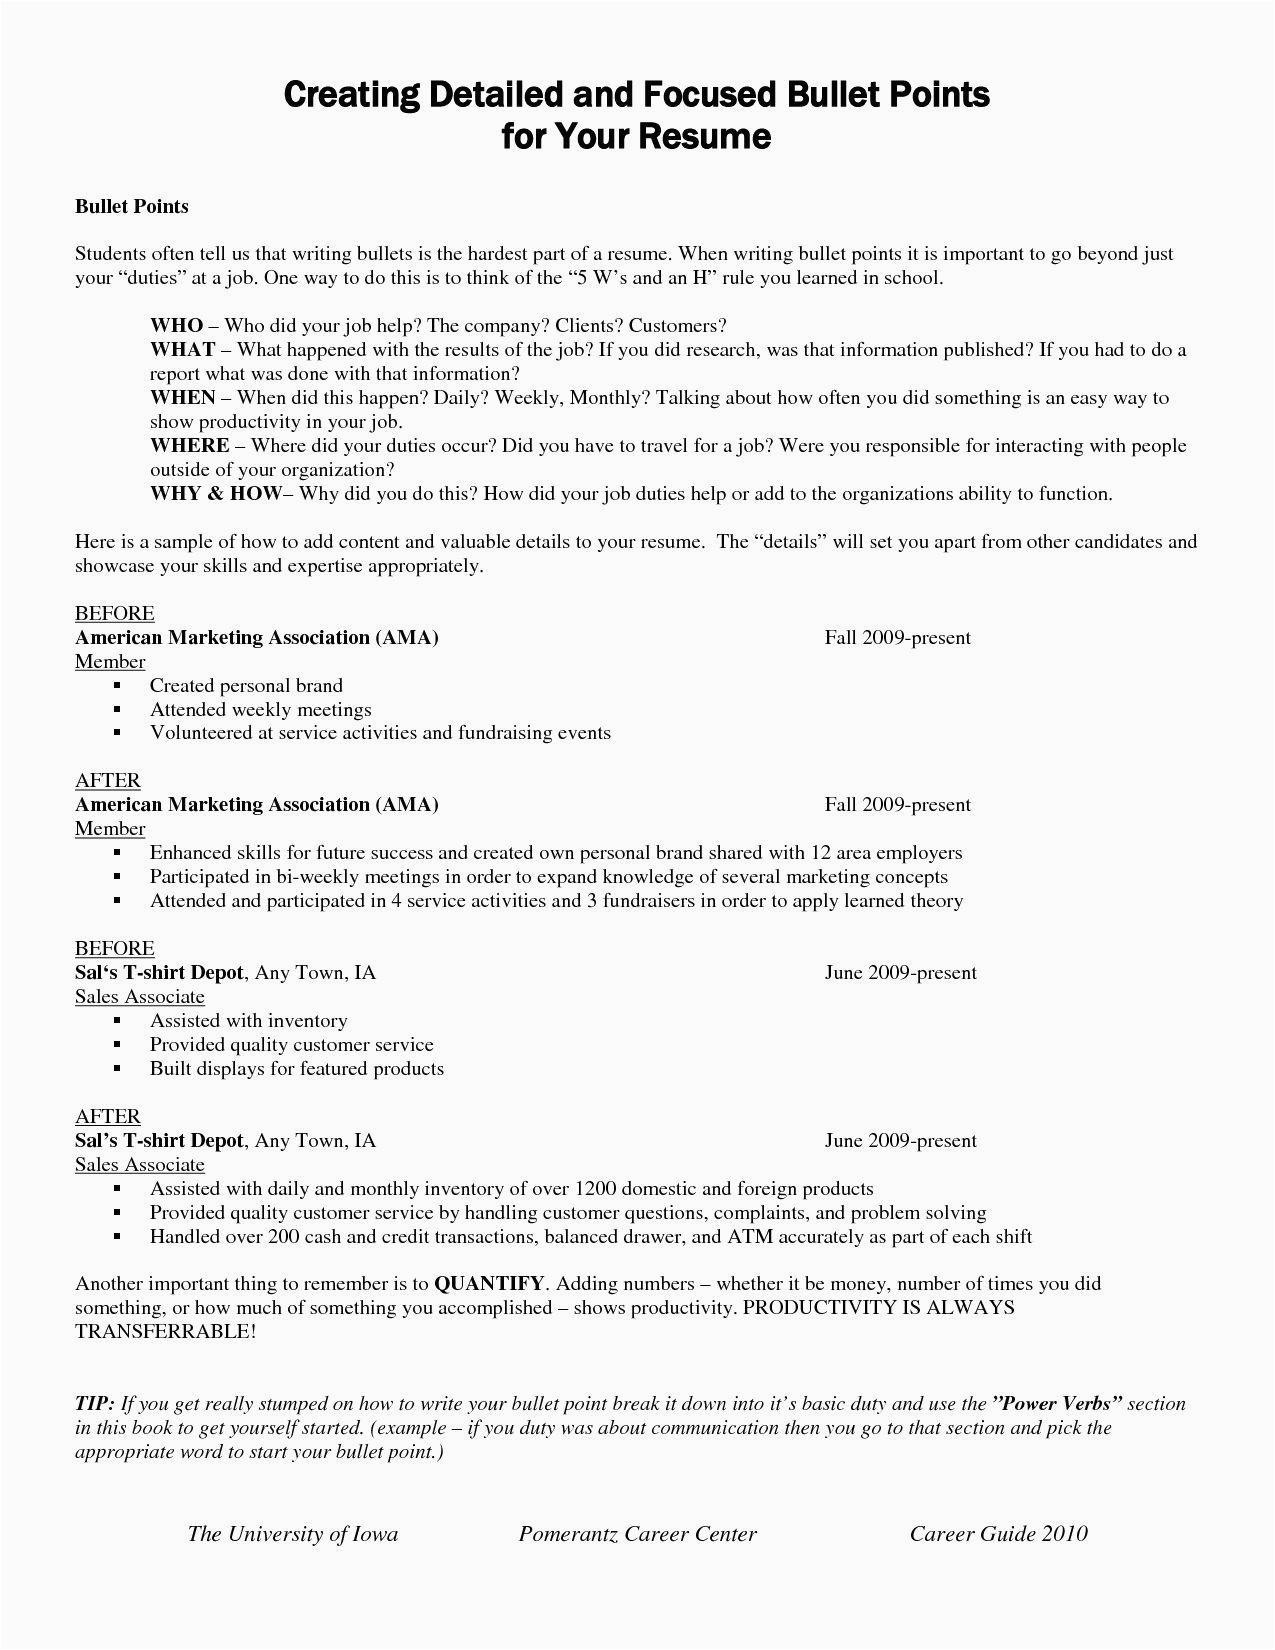 Free Resume Templates with Bullet Points Resume format Bullet Points Resume format